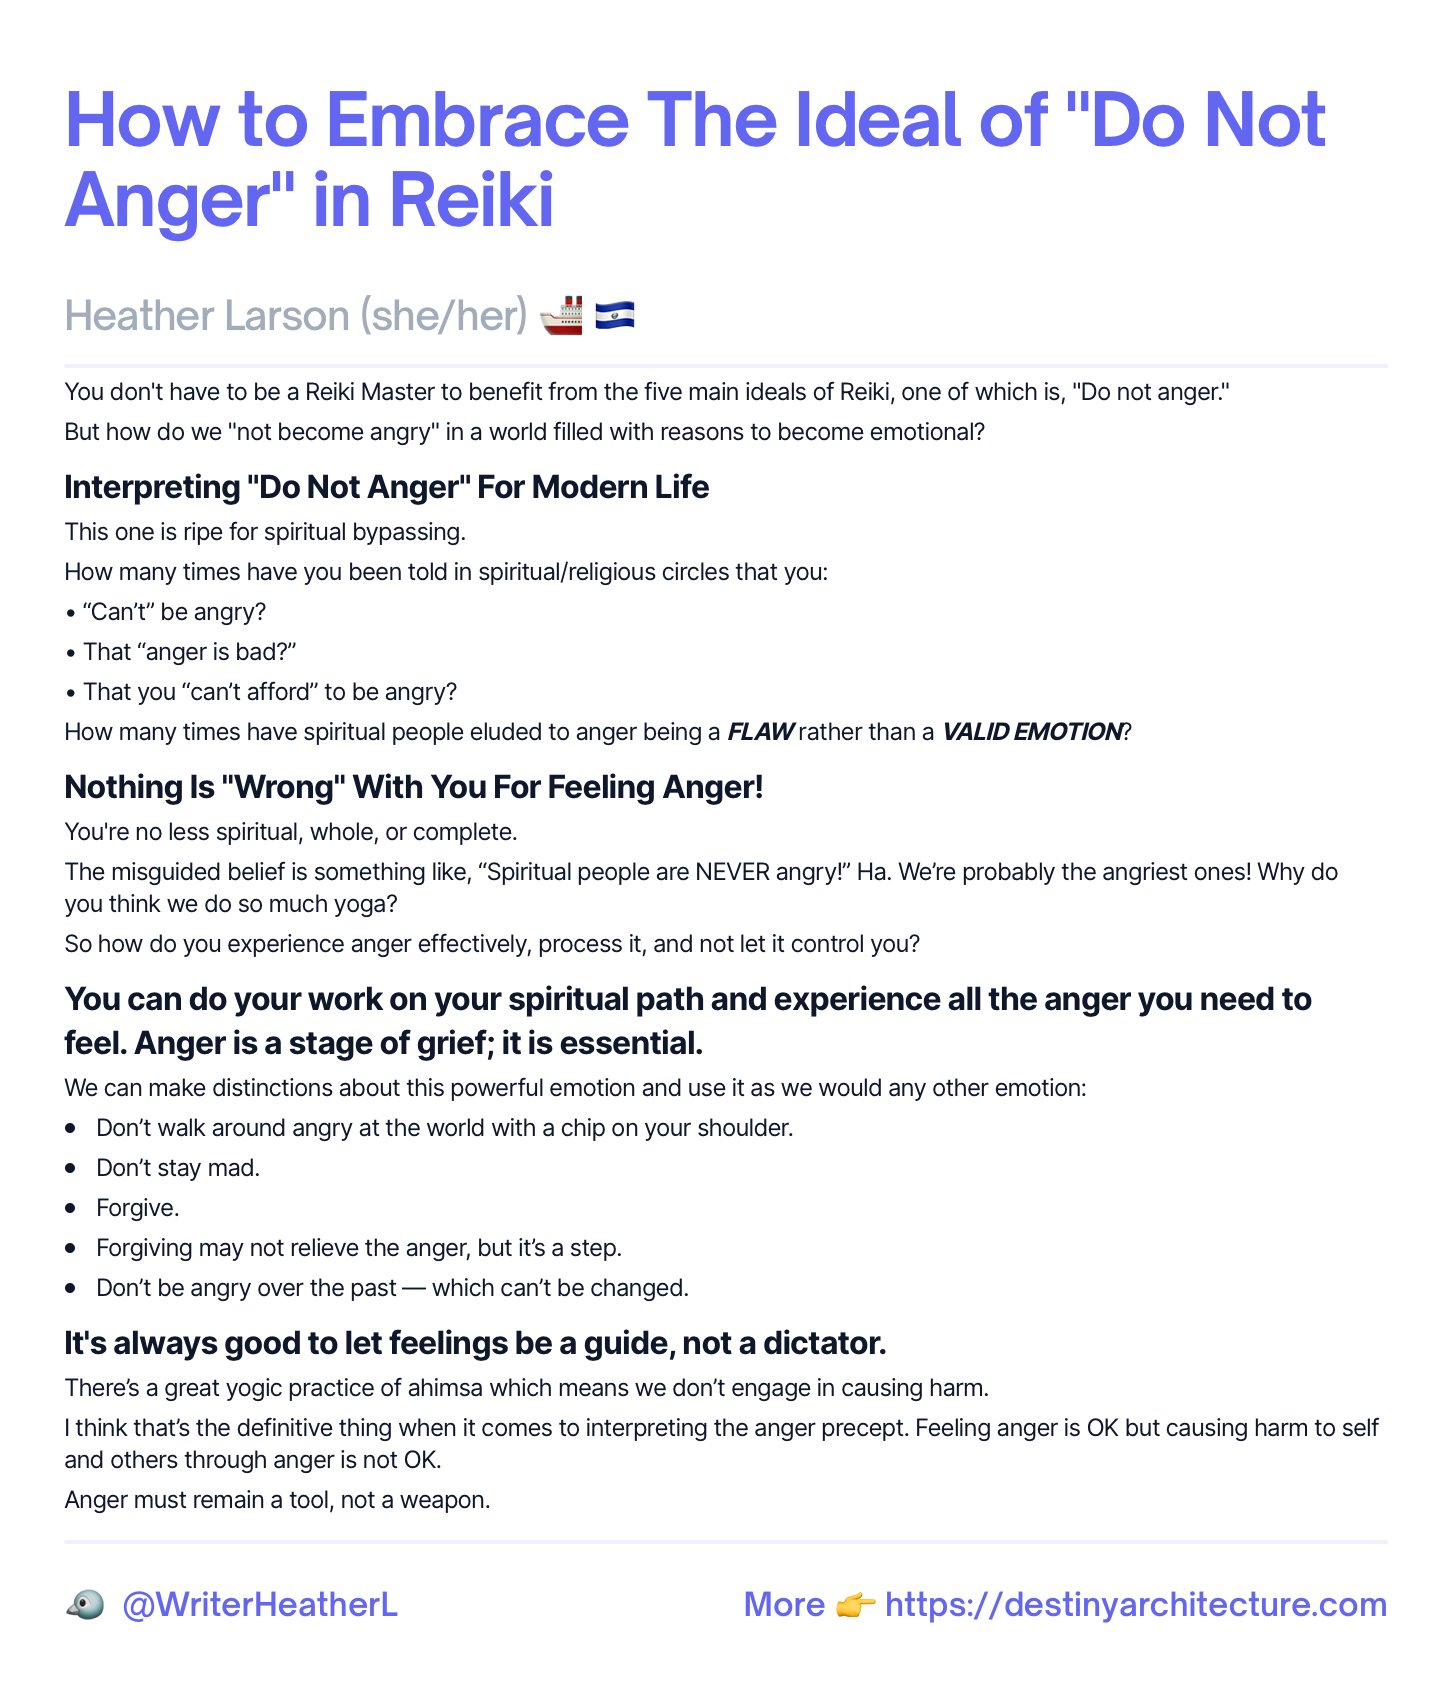 What Does the Reiki Ideal of "Do Not Anger" Really Mean in Modern Life?